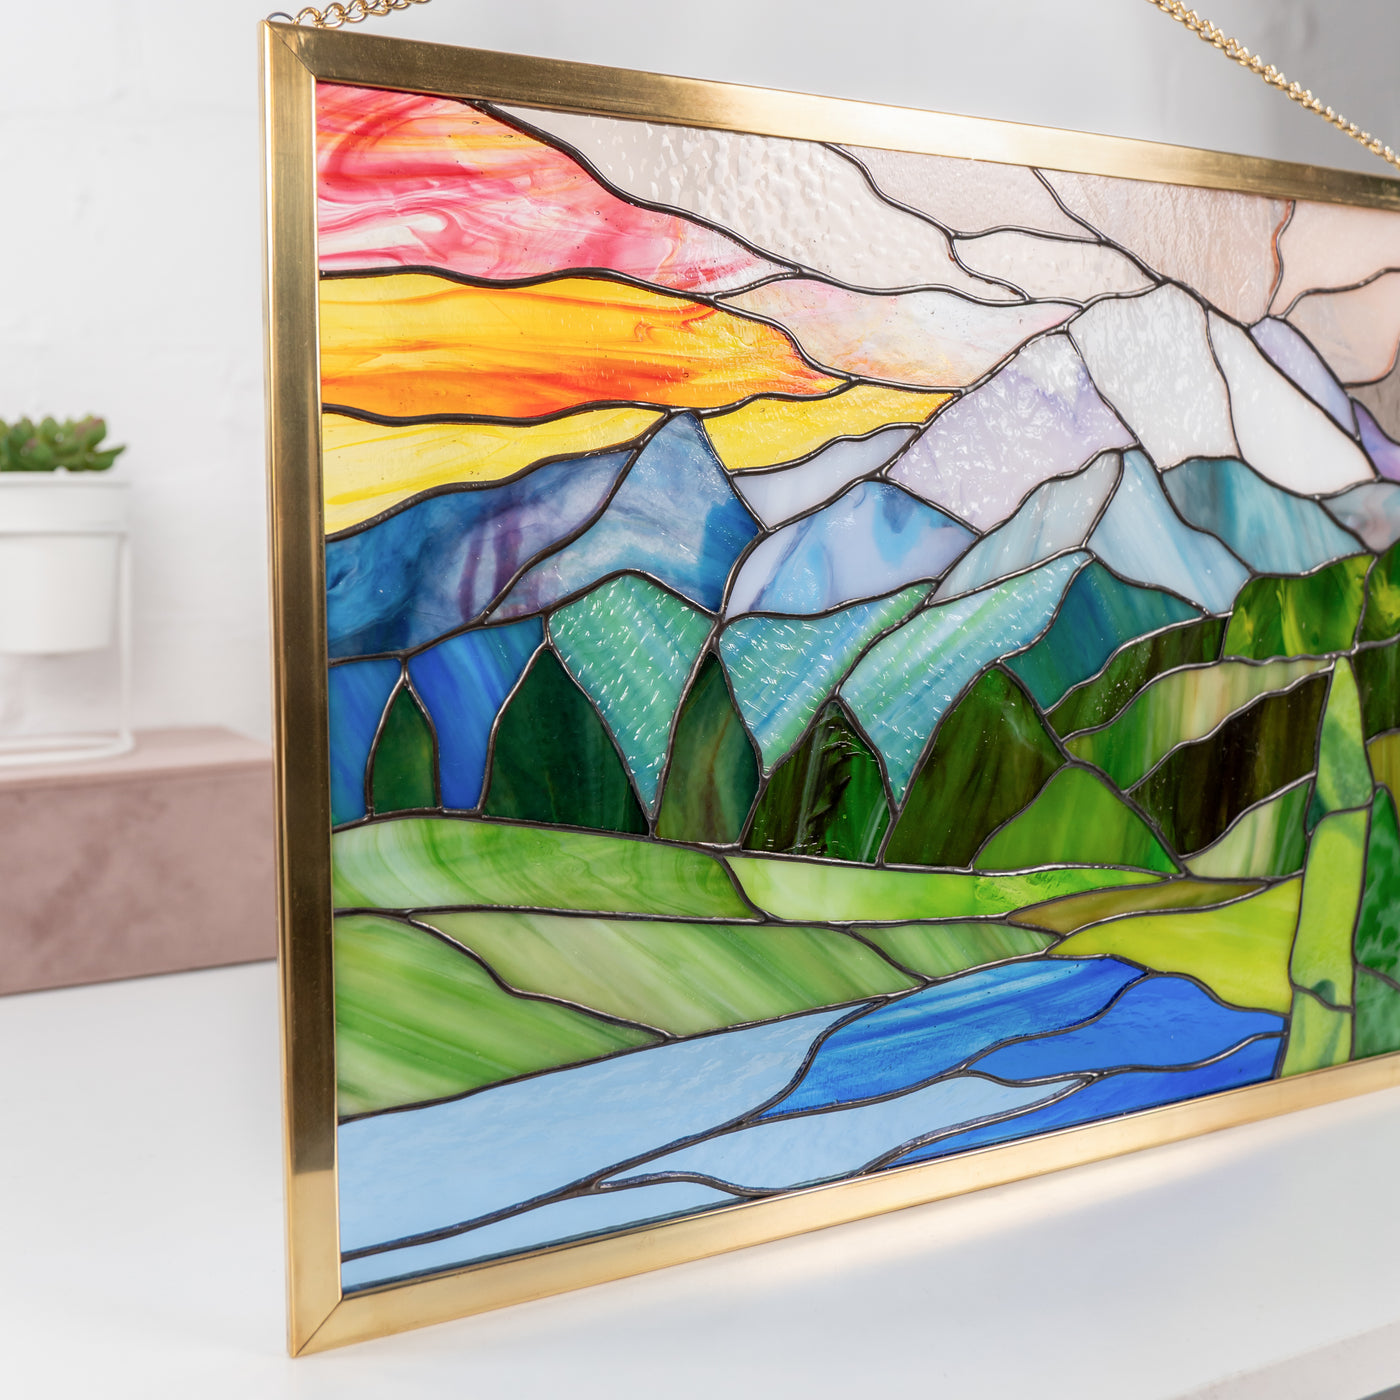 Glacier panel made of stained glass in the golden frame